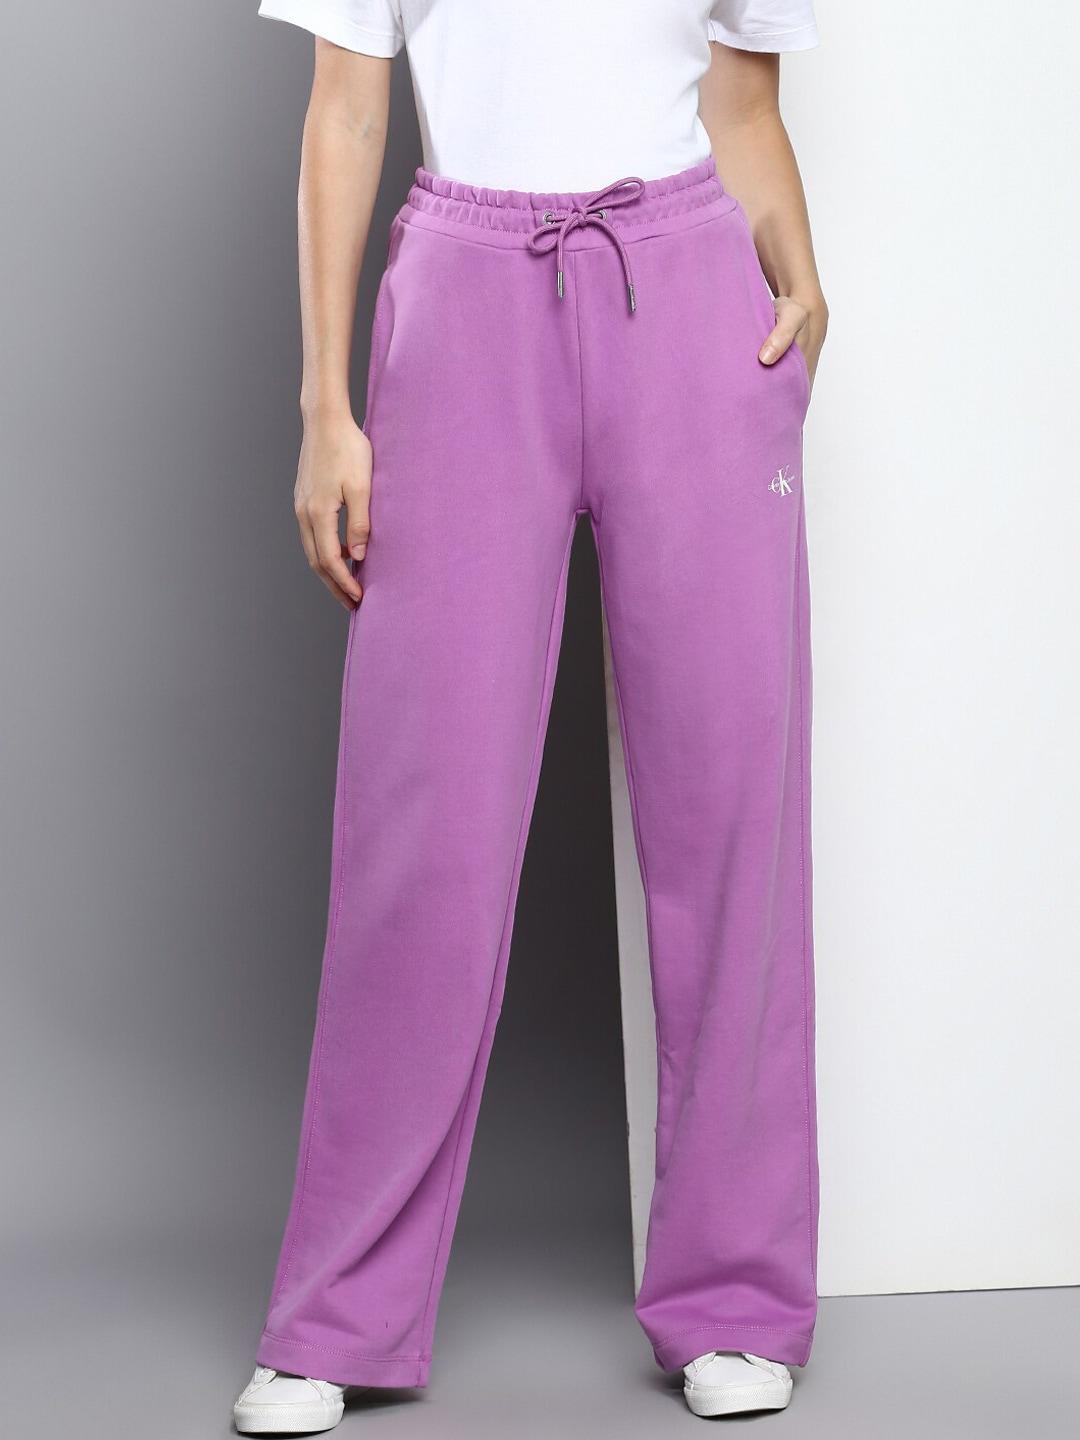 Calvin Klein Jeans Women Relaxed-Fit Track Pants